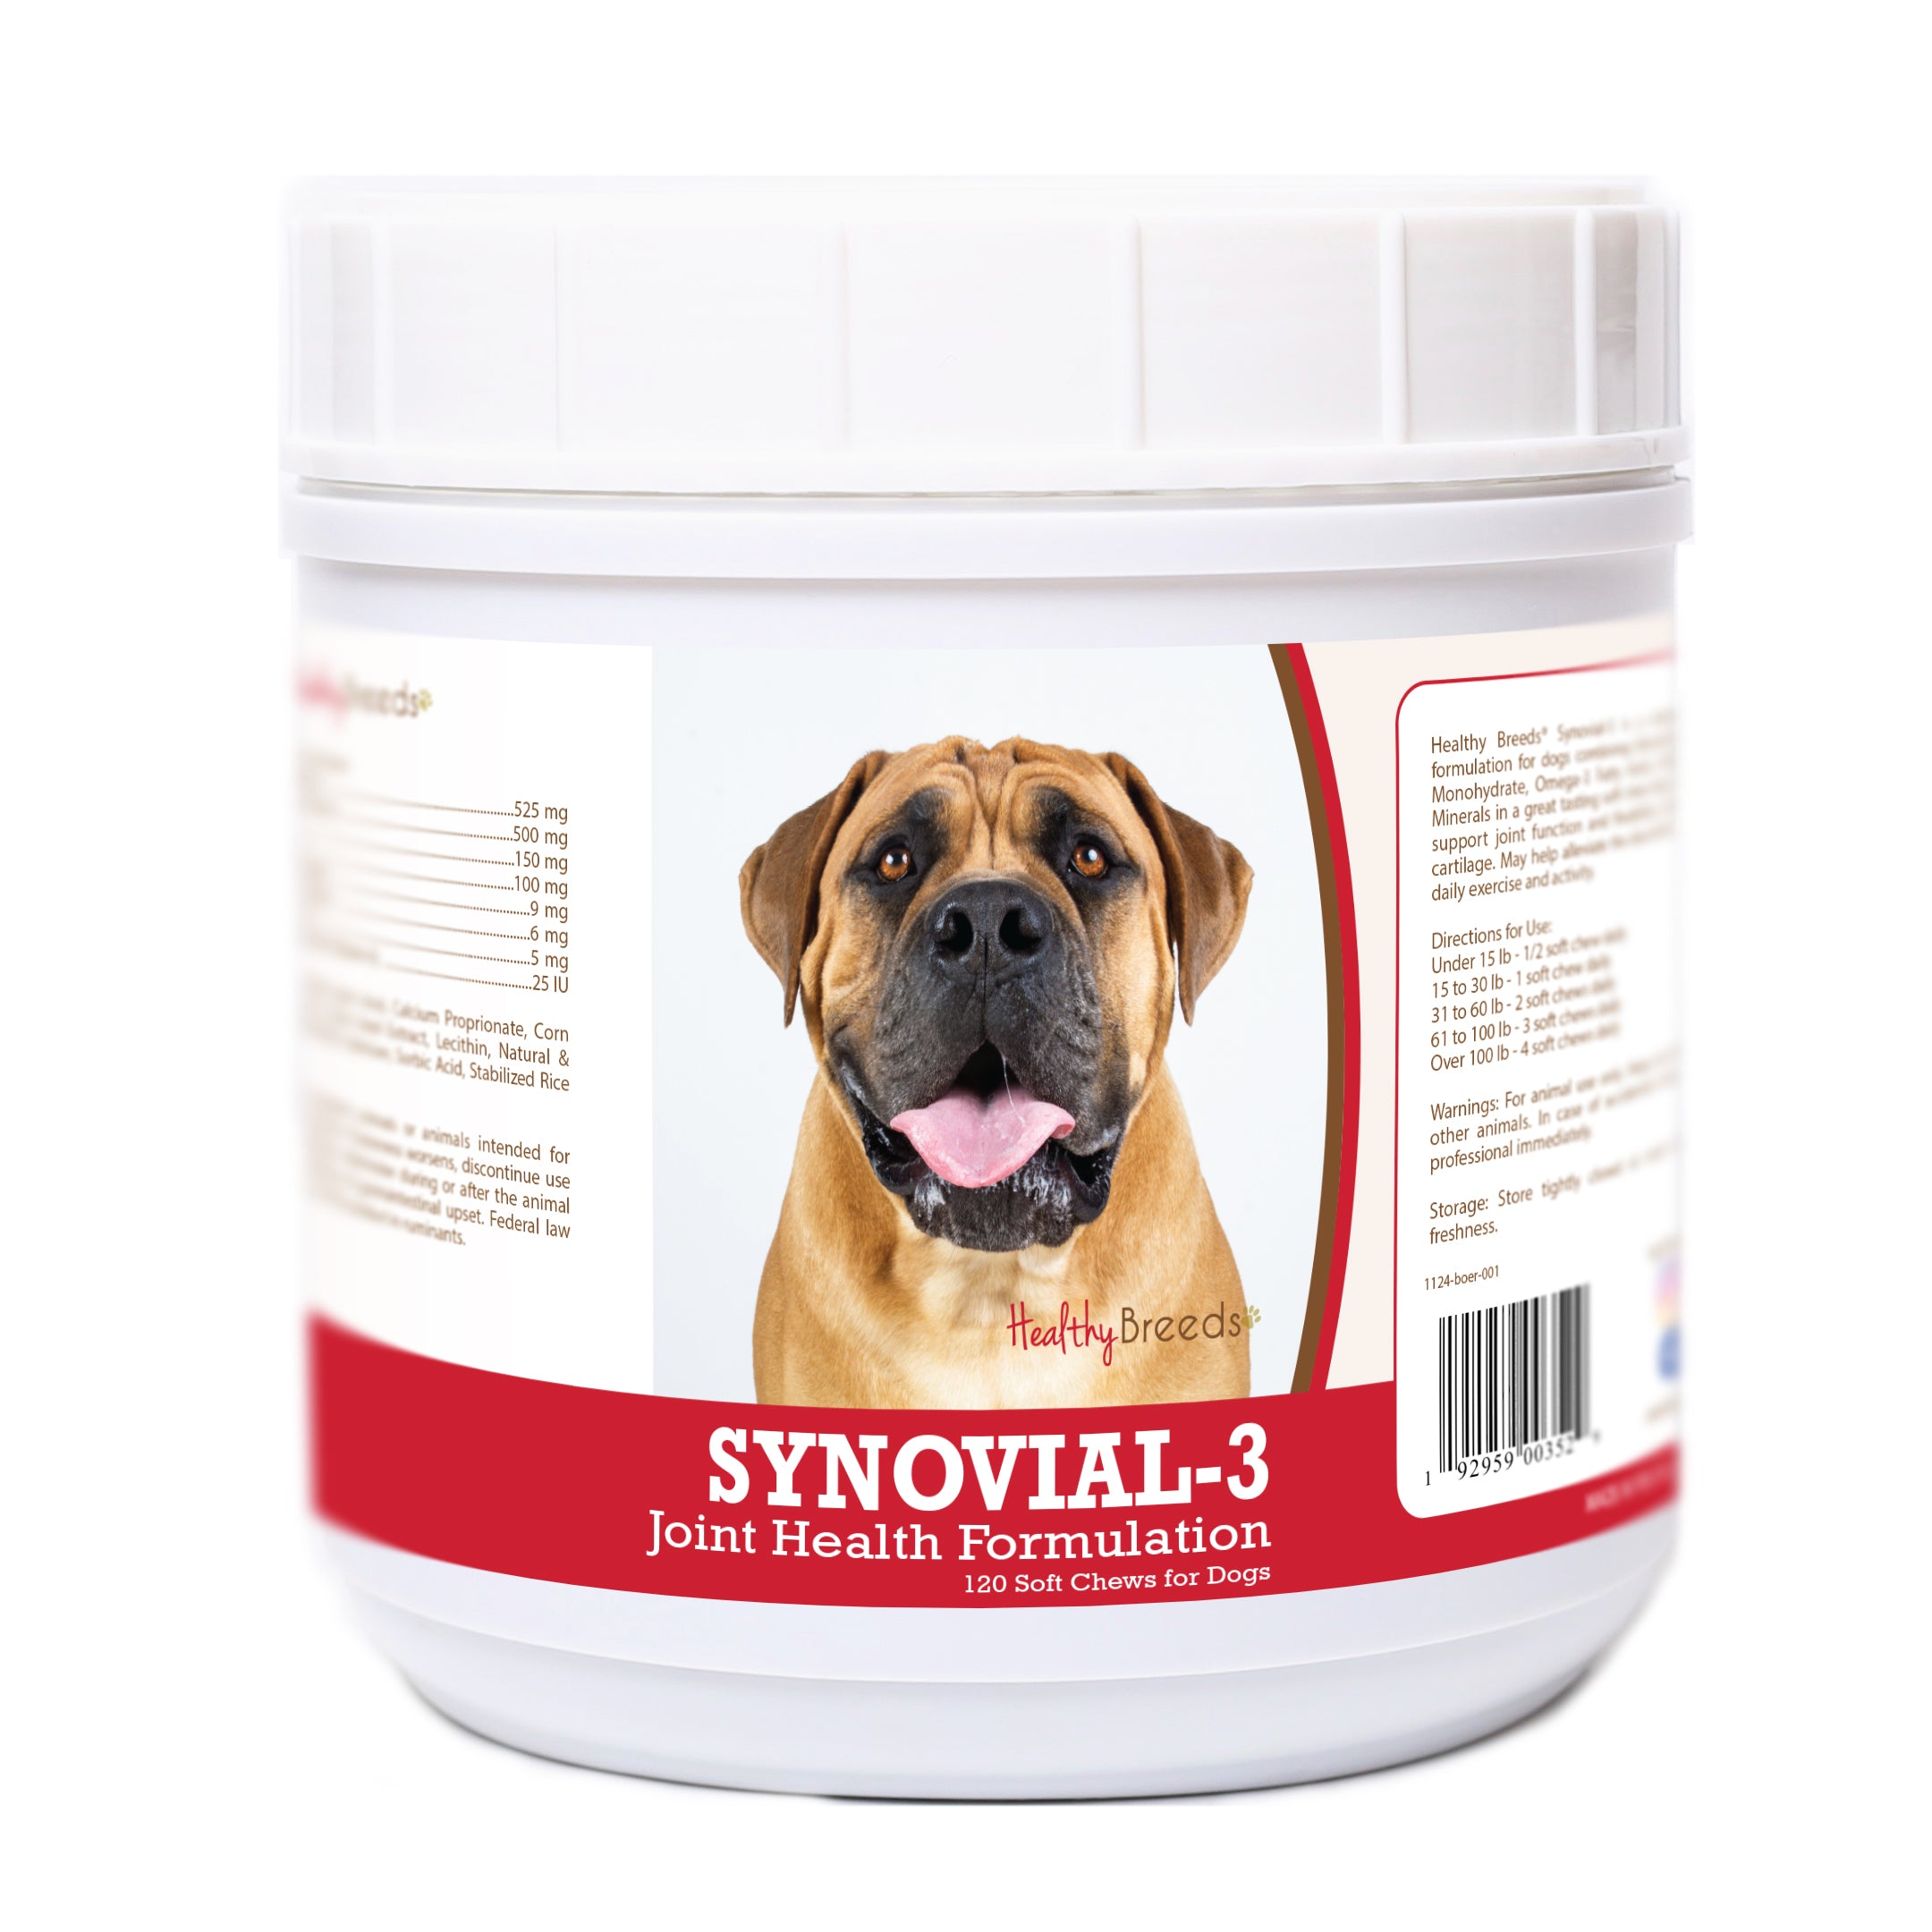 Boerboel Synovial-3 Joint Health Formulation Soft Chews 120 Count